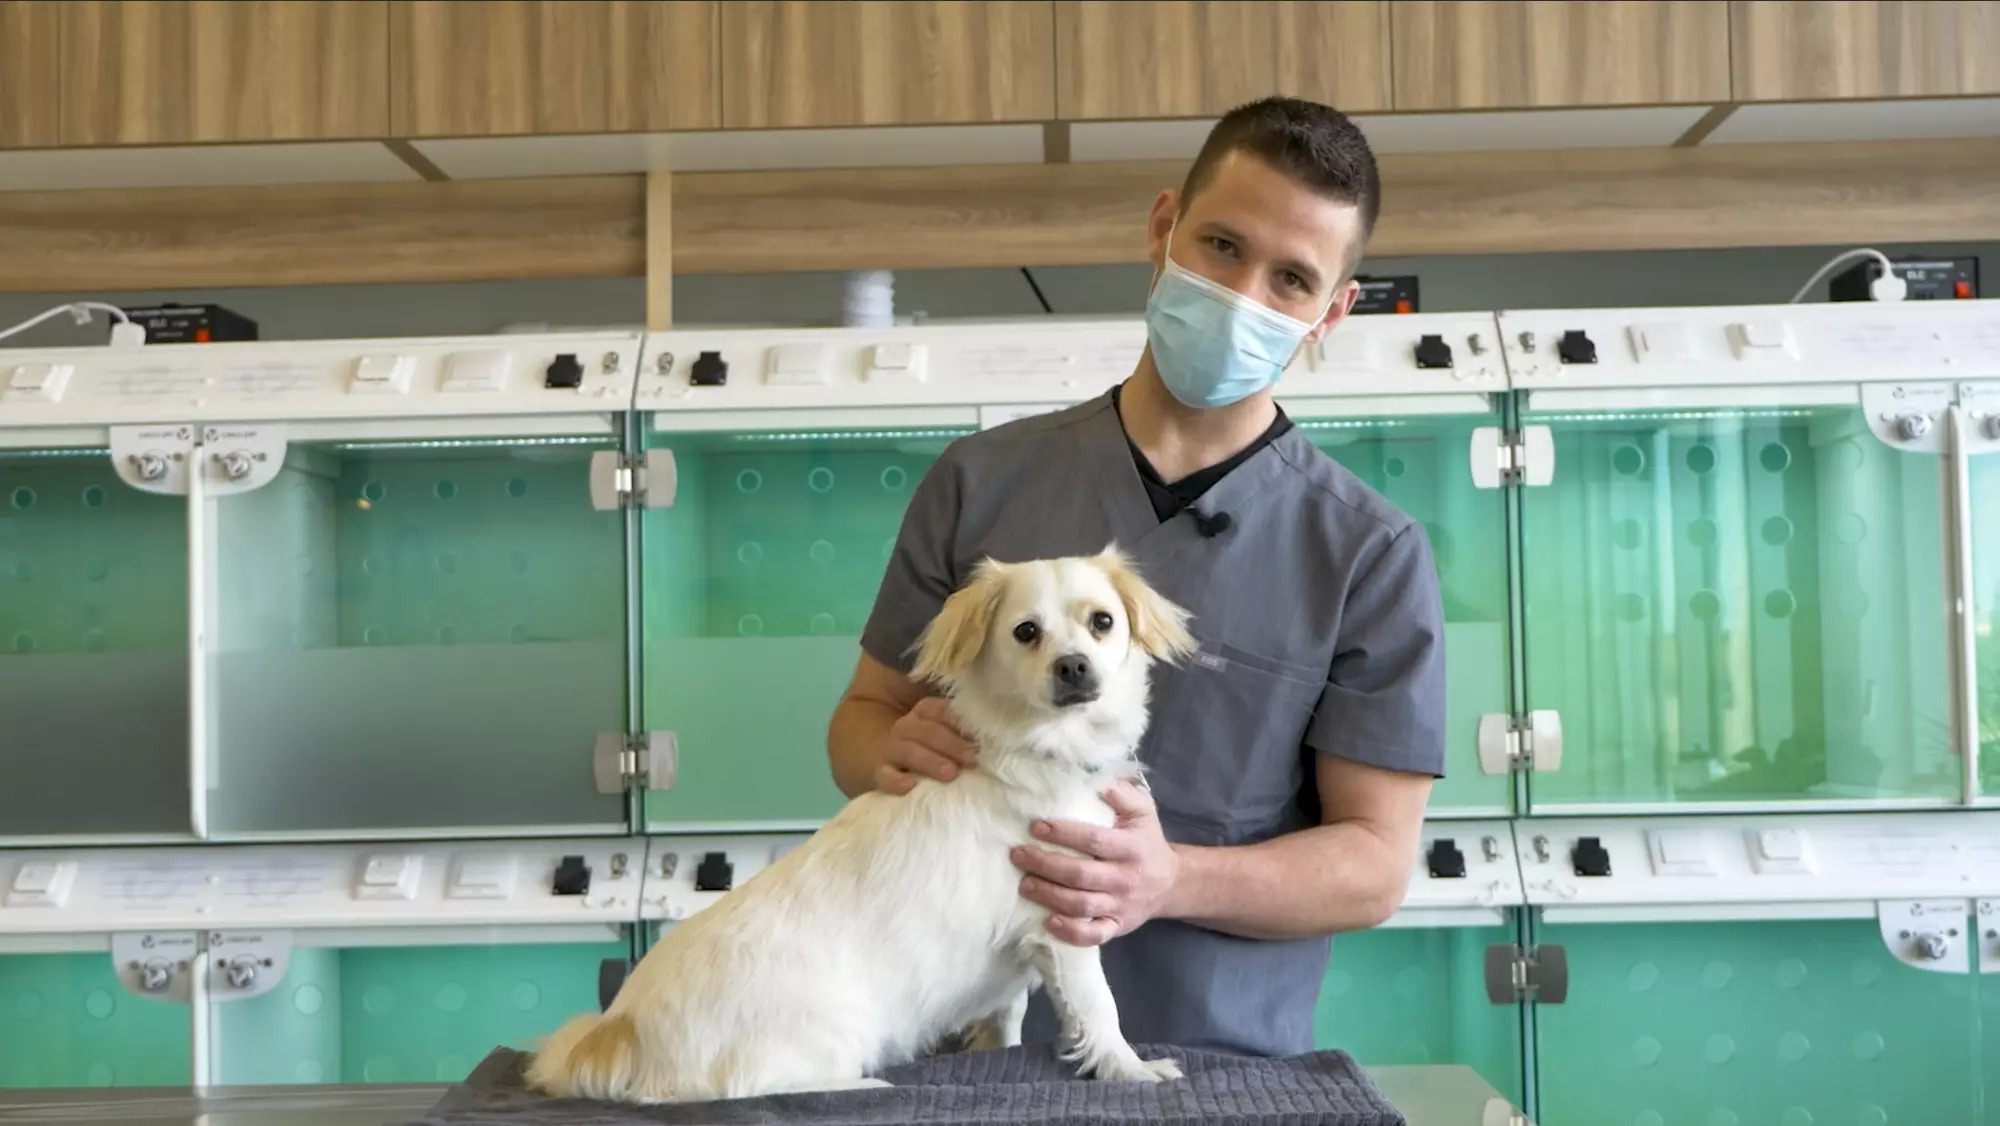 Veterinarian from FenVet posing with a dog